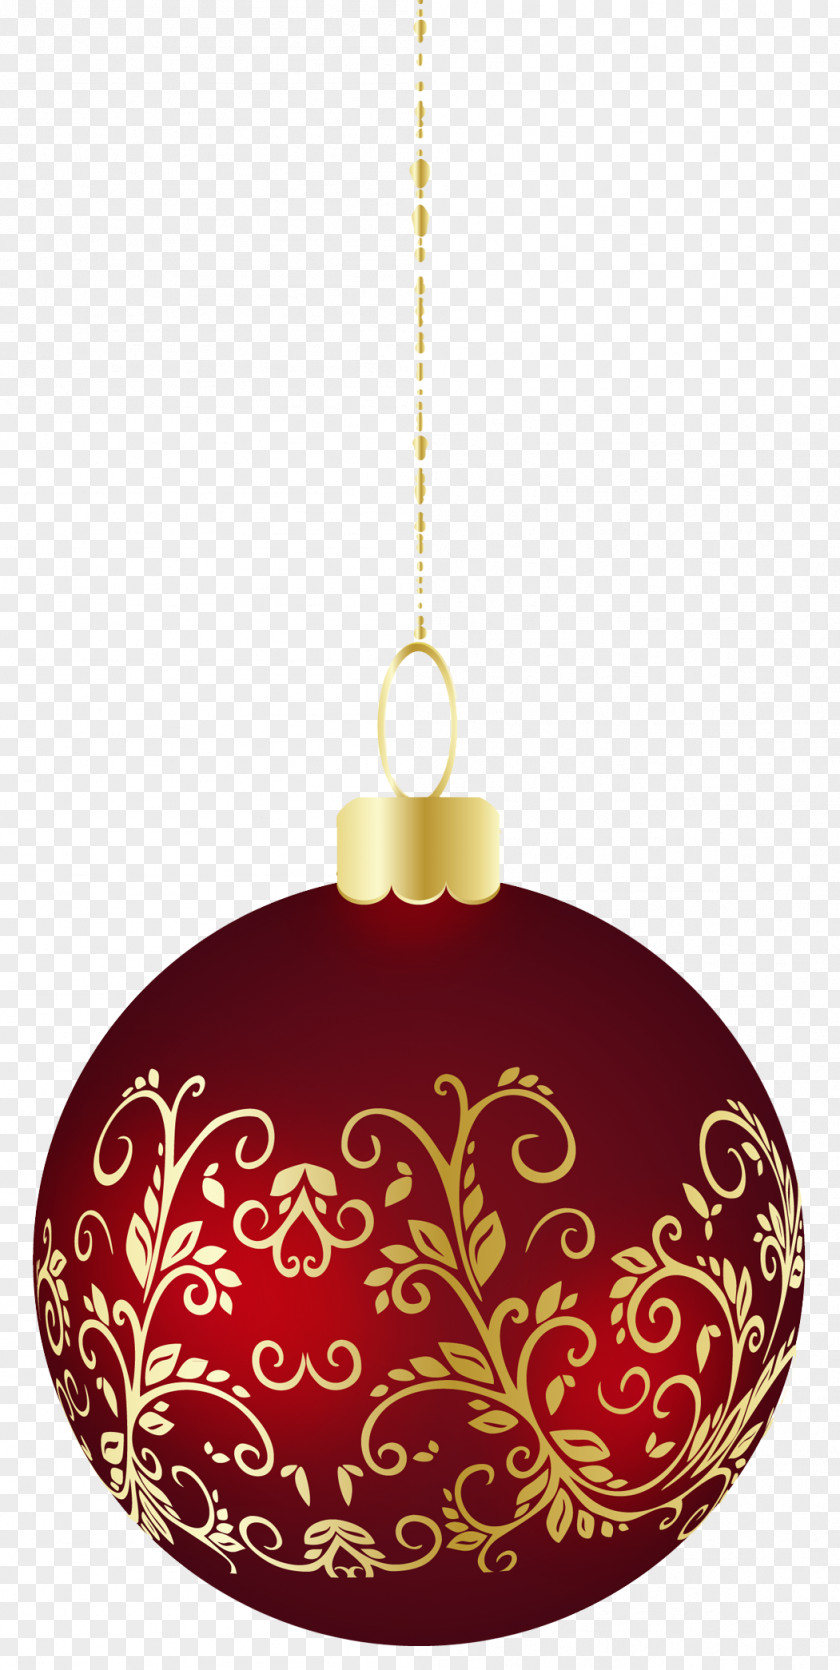 Large Transparent Christmas Ball Ornament Clipart PNG